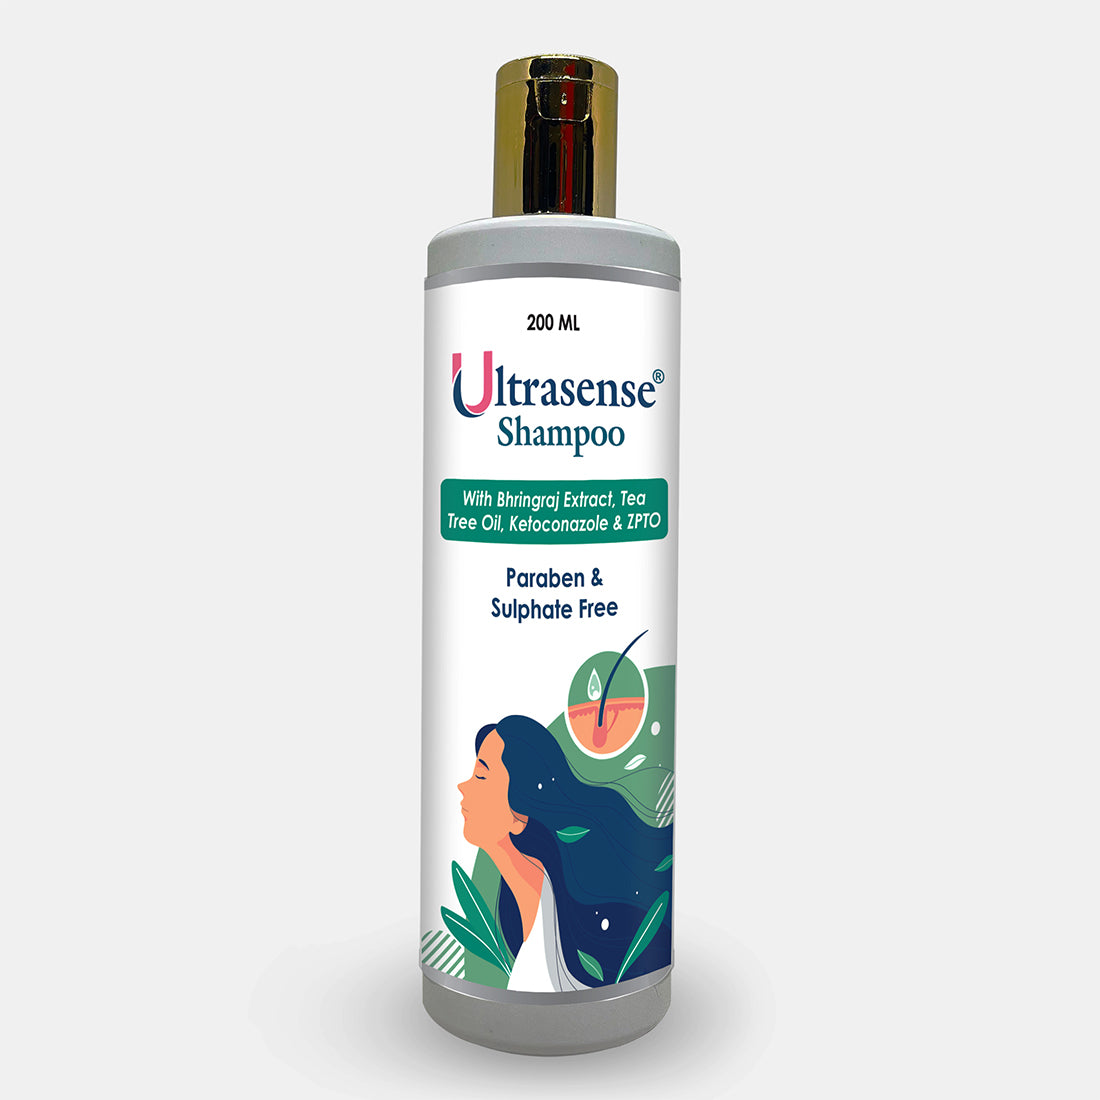 Ultrasense shampoo - For Soft, Silky, and Healthy Looking Hair